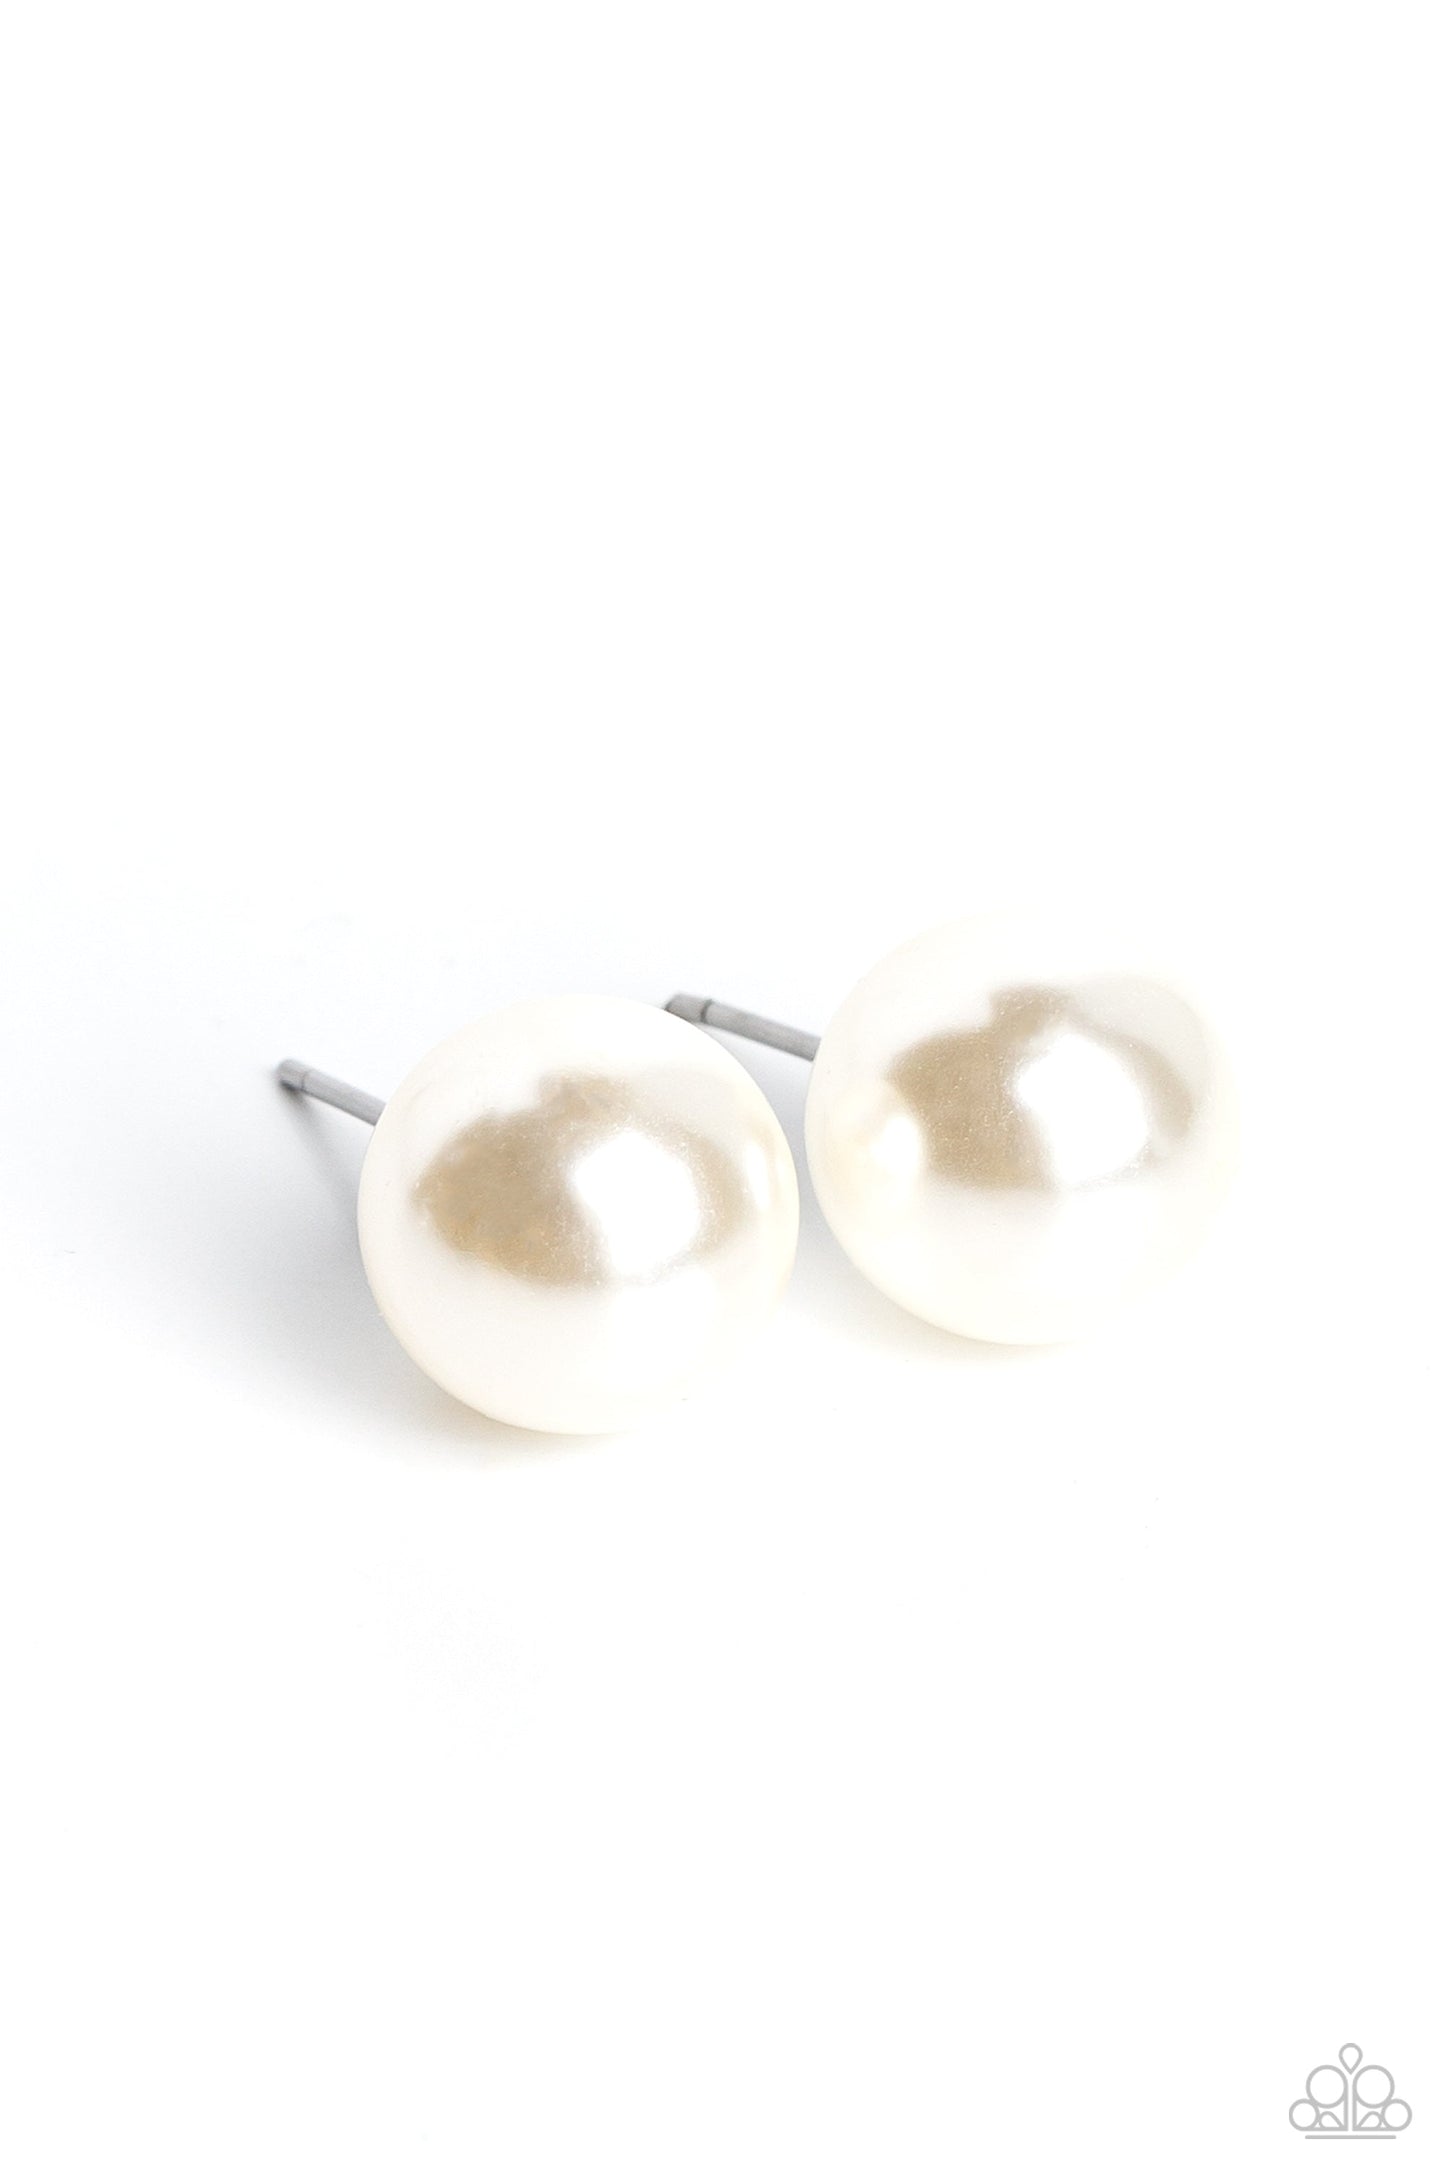 Debutante Details - White Pearl Earrings - Paparazzi Accessories - An oversized white pearl, stands out against the ear adding a timeless twist to a basic staple piece perfect for layering. Earring attaches to a standard post fitting. Sold as one pair of post earrings.